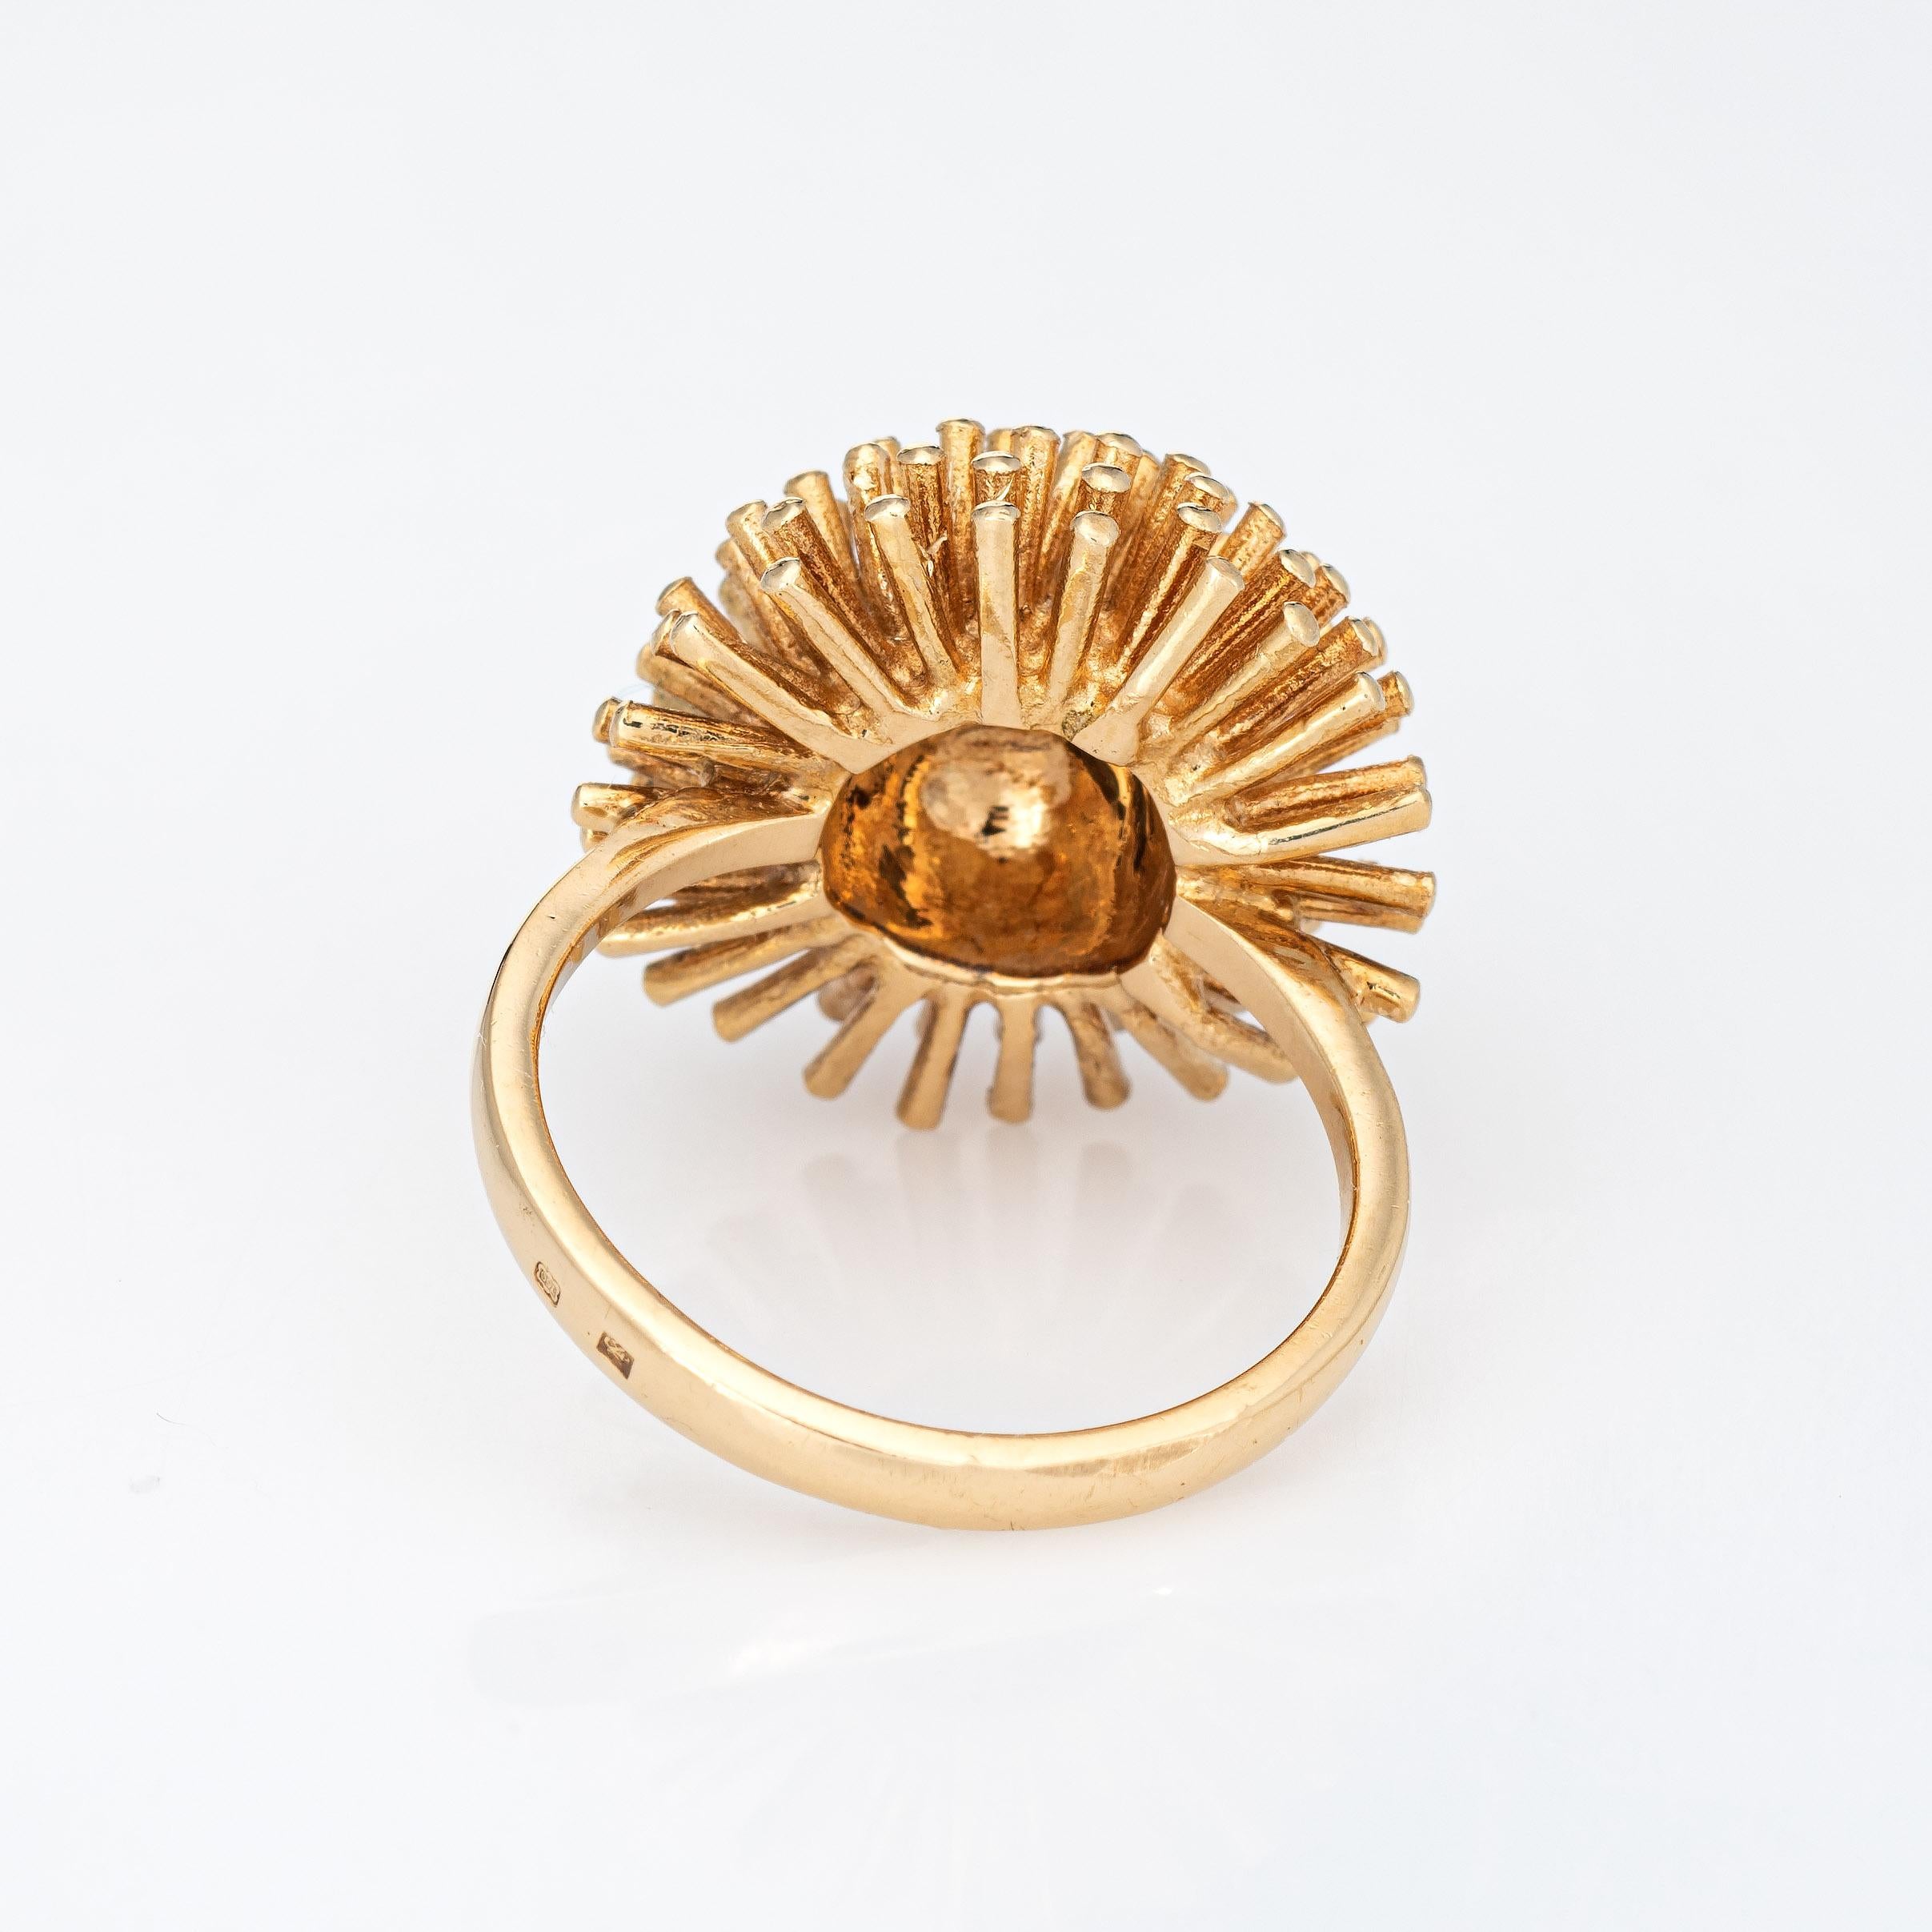 Women's Dandelion Ring Vintage 18k Yellow Gold Round Dome Estate Cocktail Jewelry